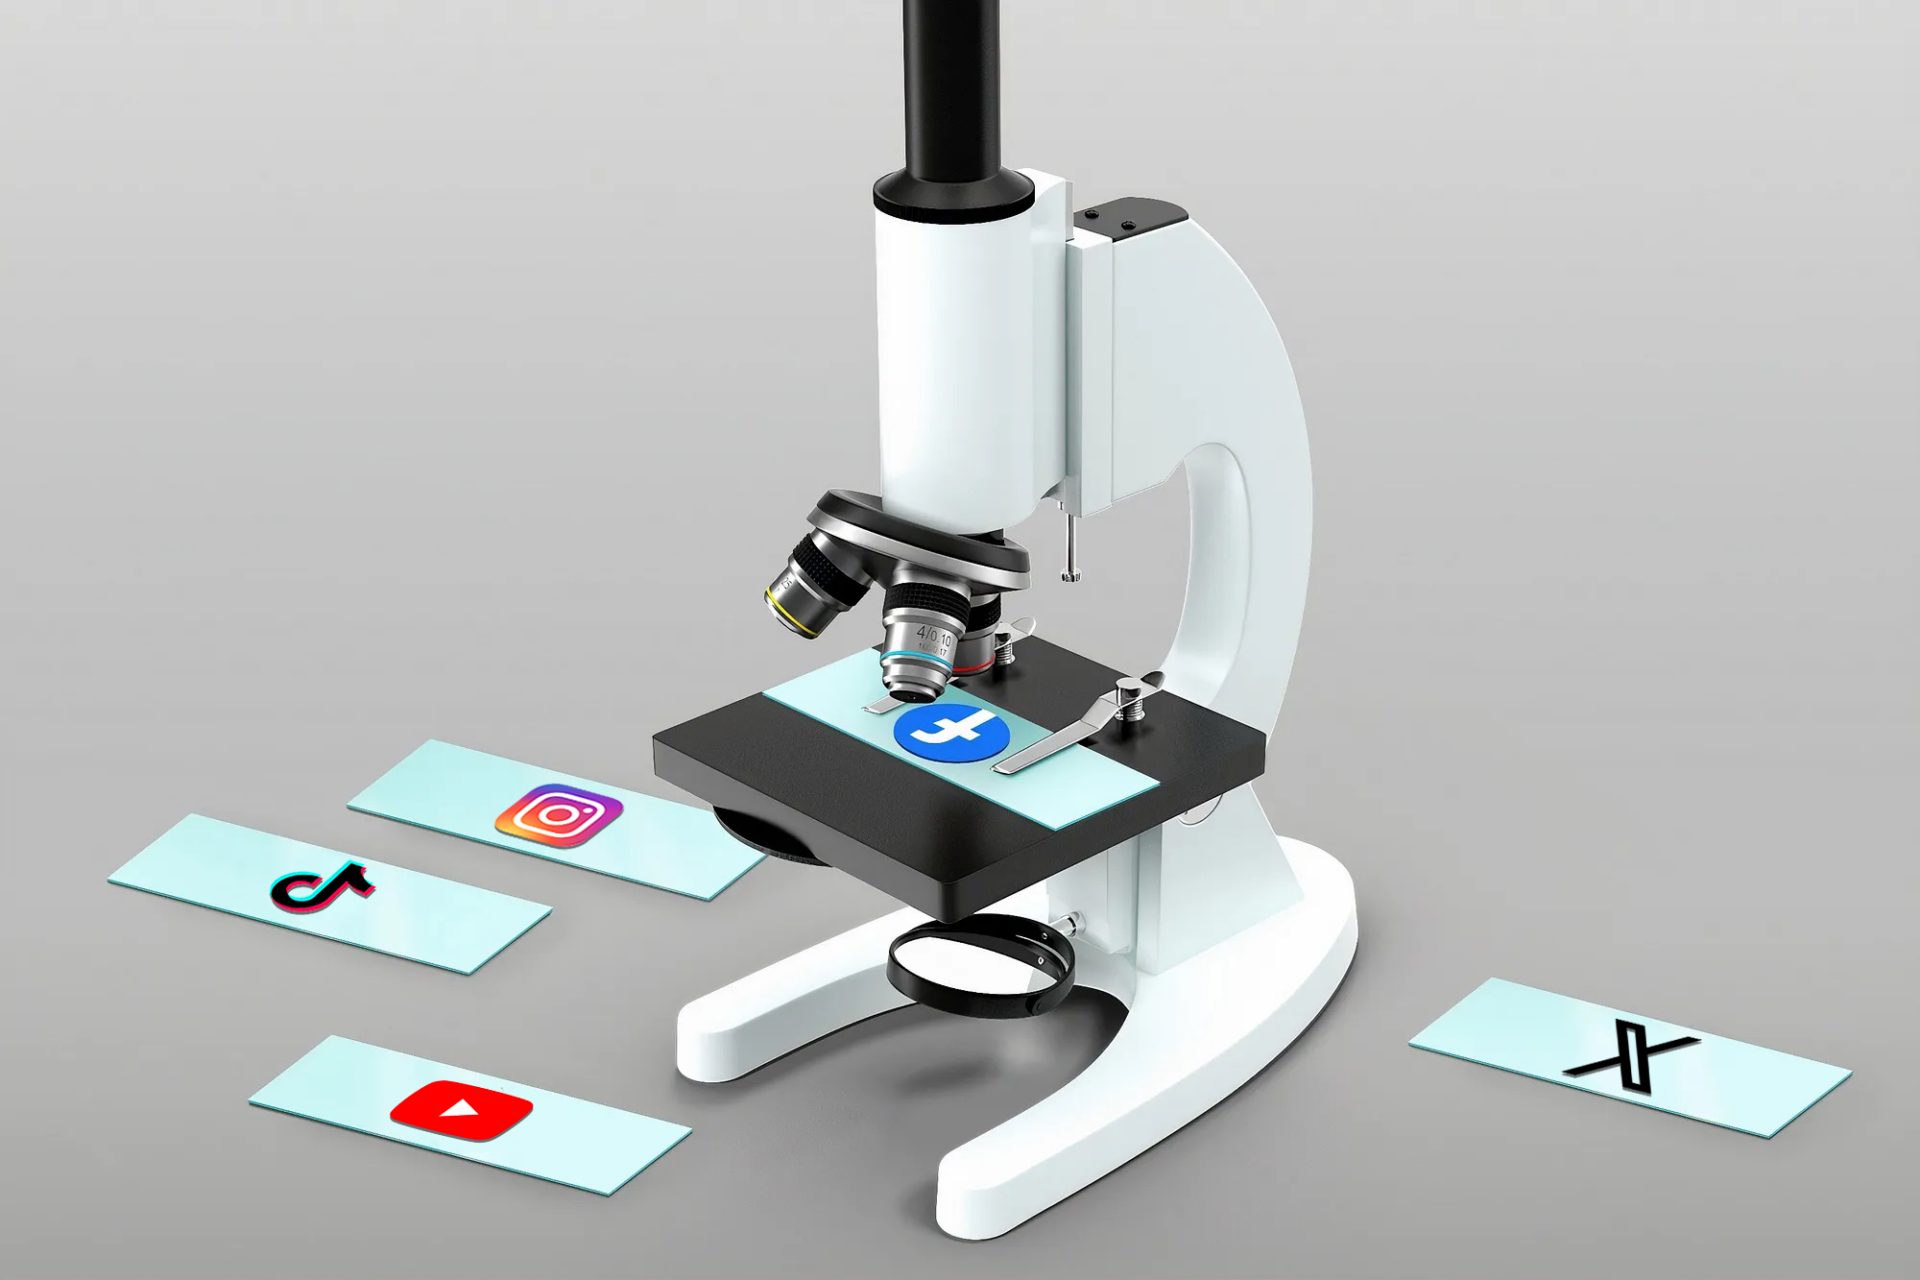 A microscope with cards displaying logos of different social media platforms